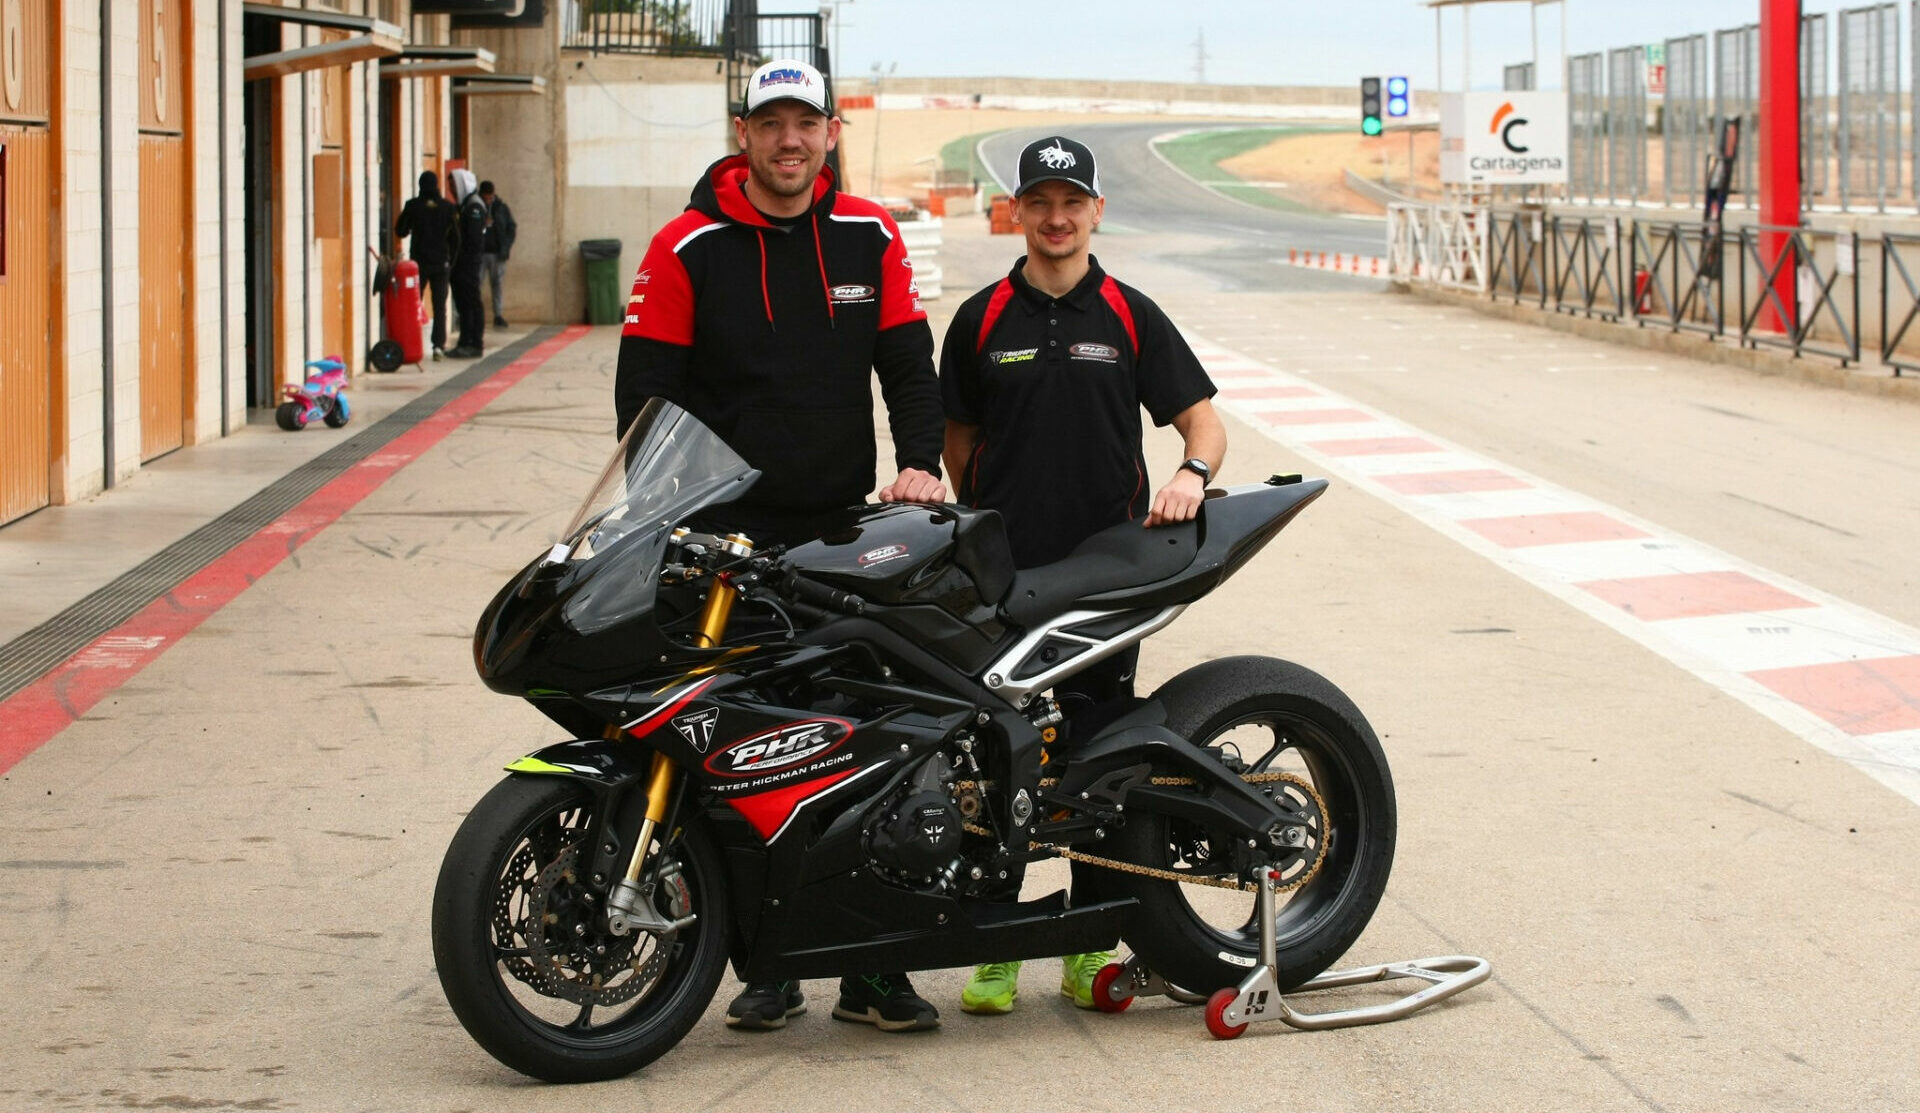 Peter Hickman (left) and Richard Cooper (right) will make up the two-rider Triumph factory-supported PHR Performance Team that will compete in the Daytona 200, March 7-9. Photo courtesy MotoAmerica.